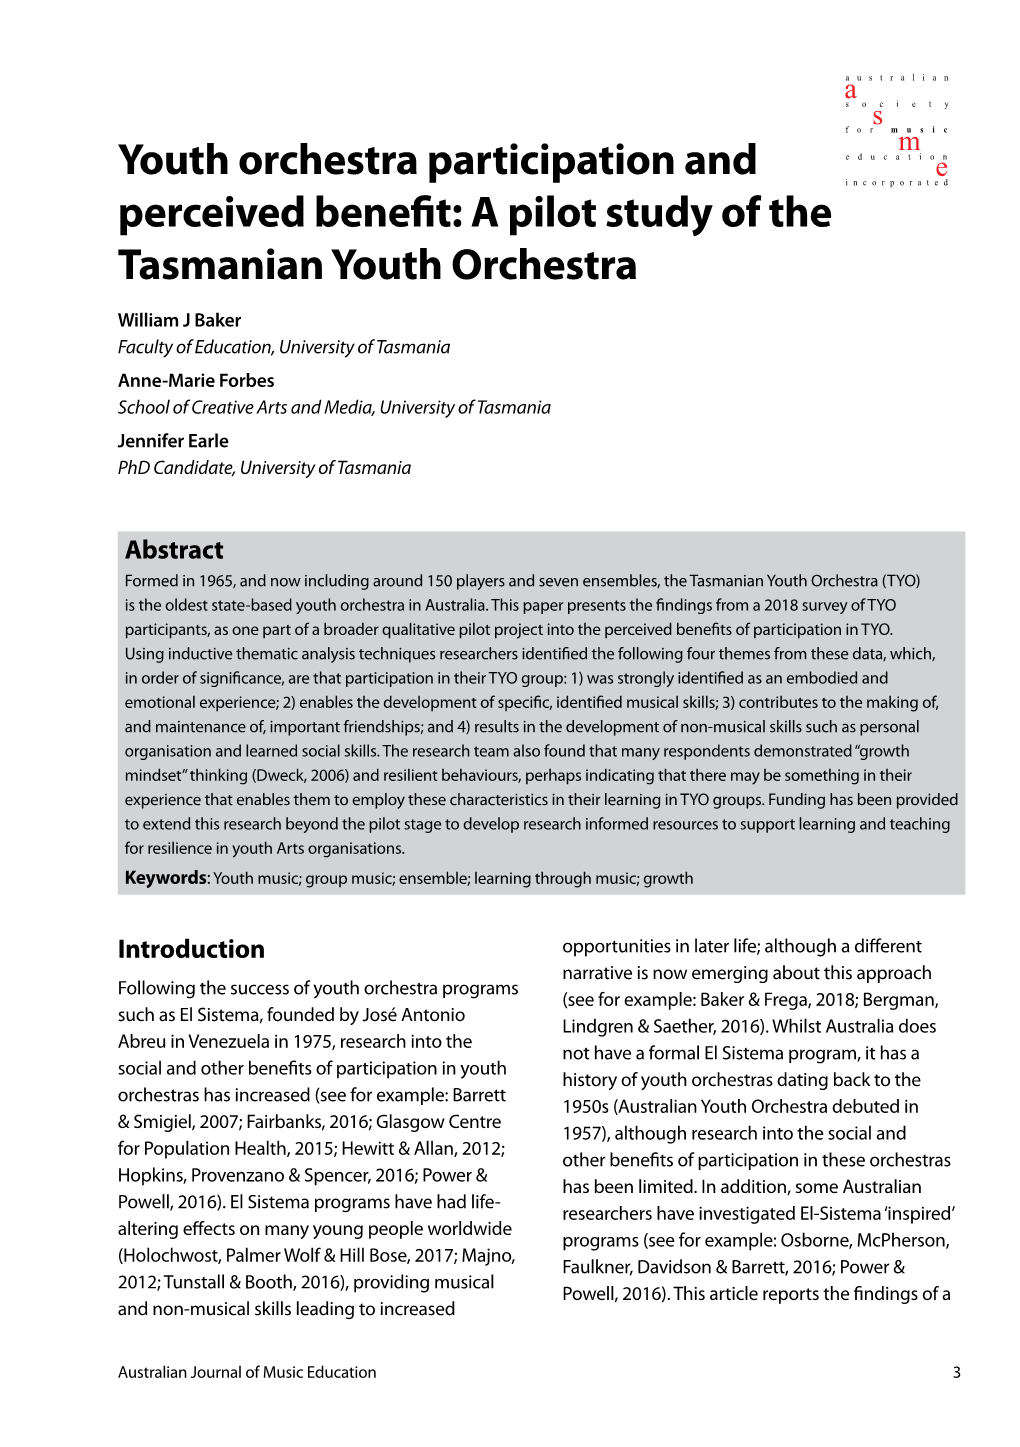 Youth Orchestra Participation and Perceived Benefit